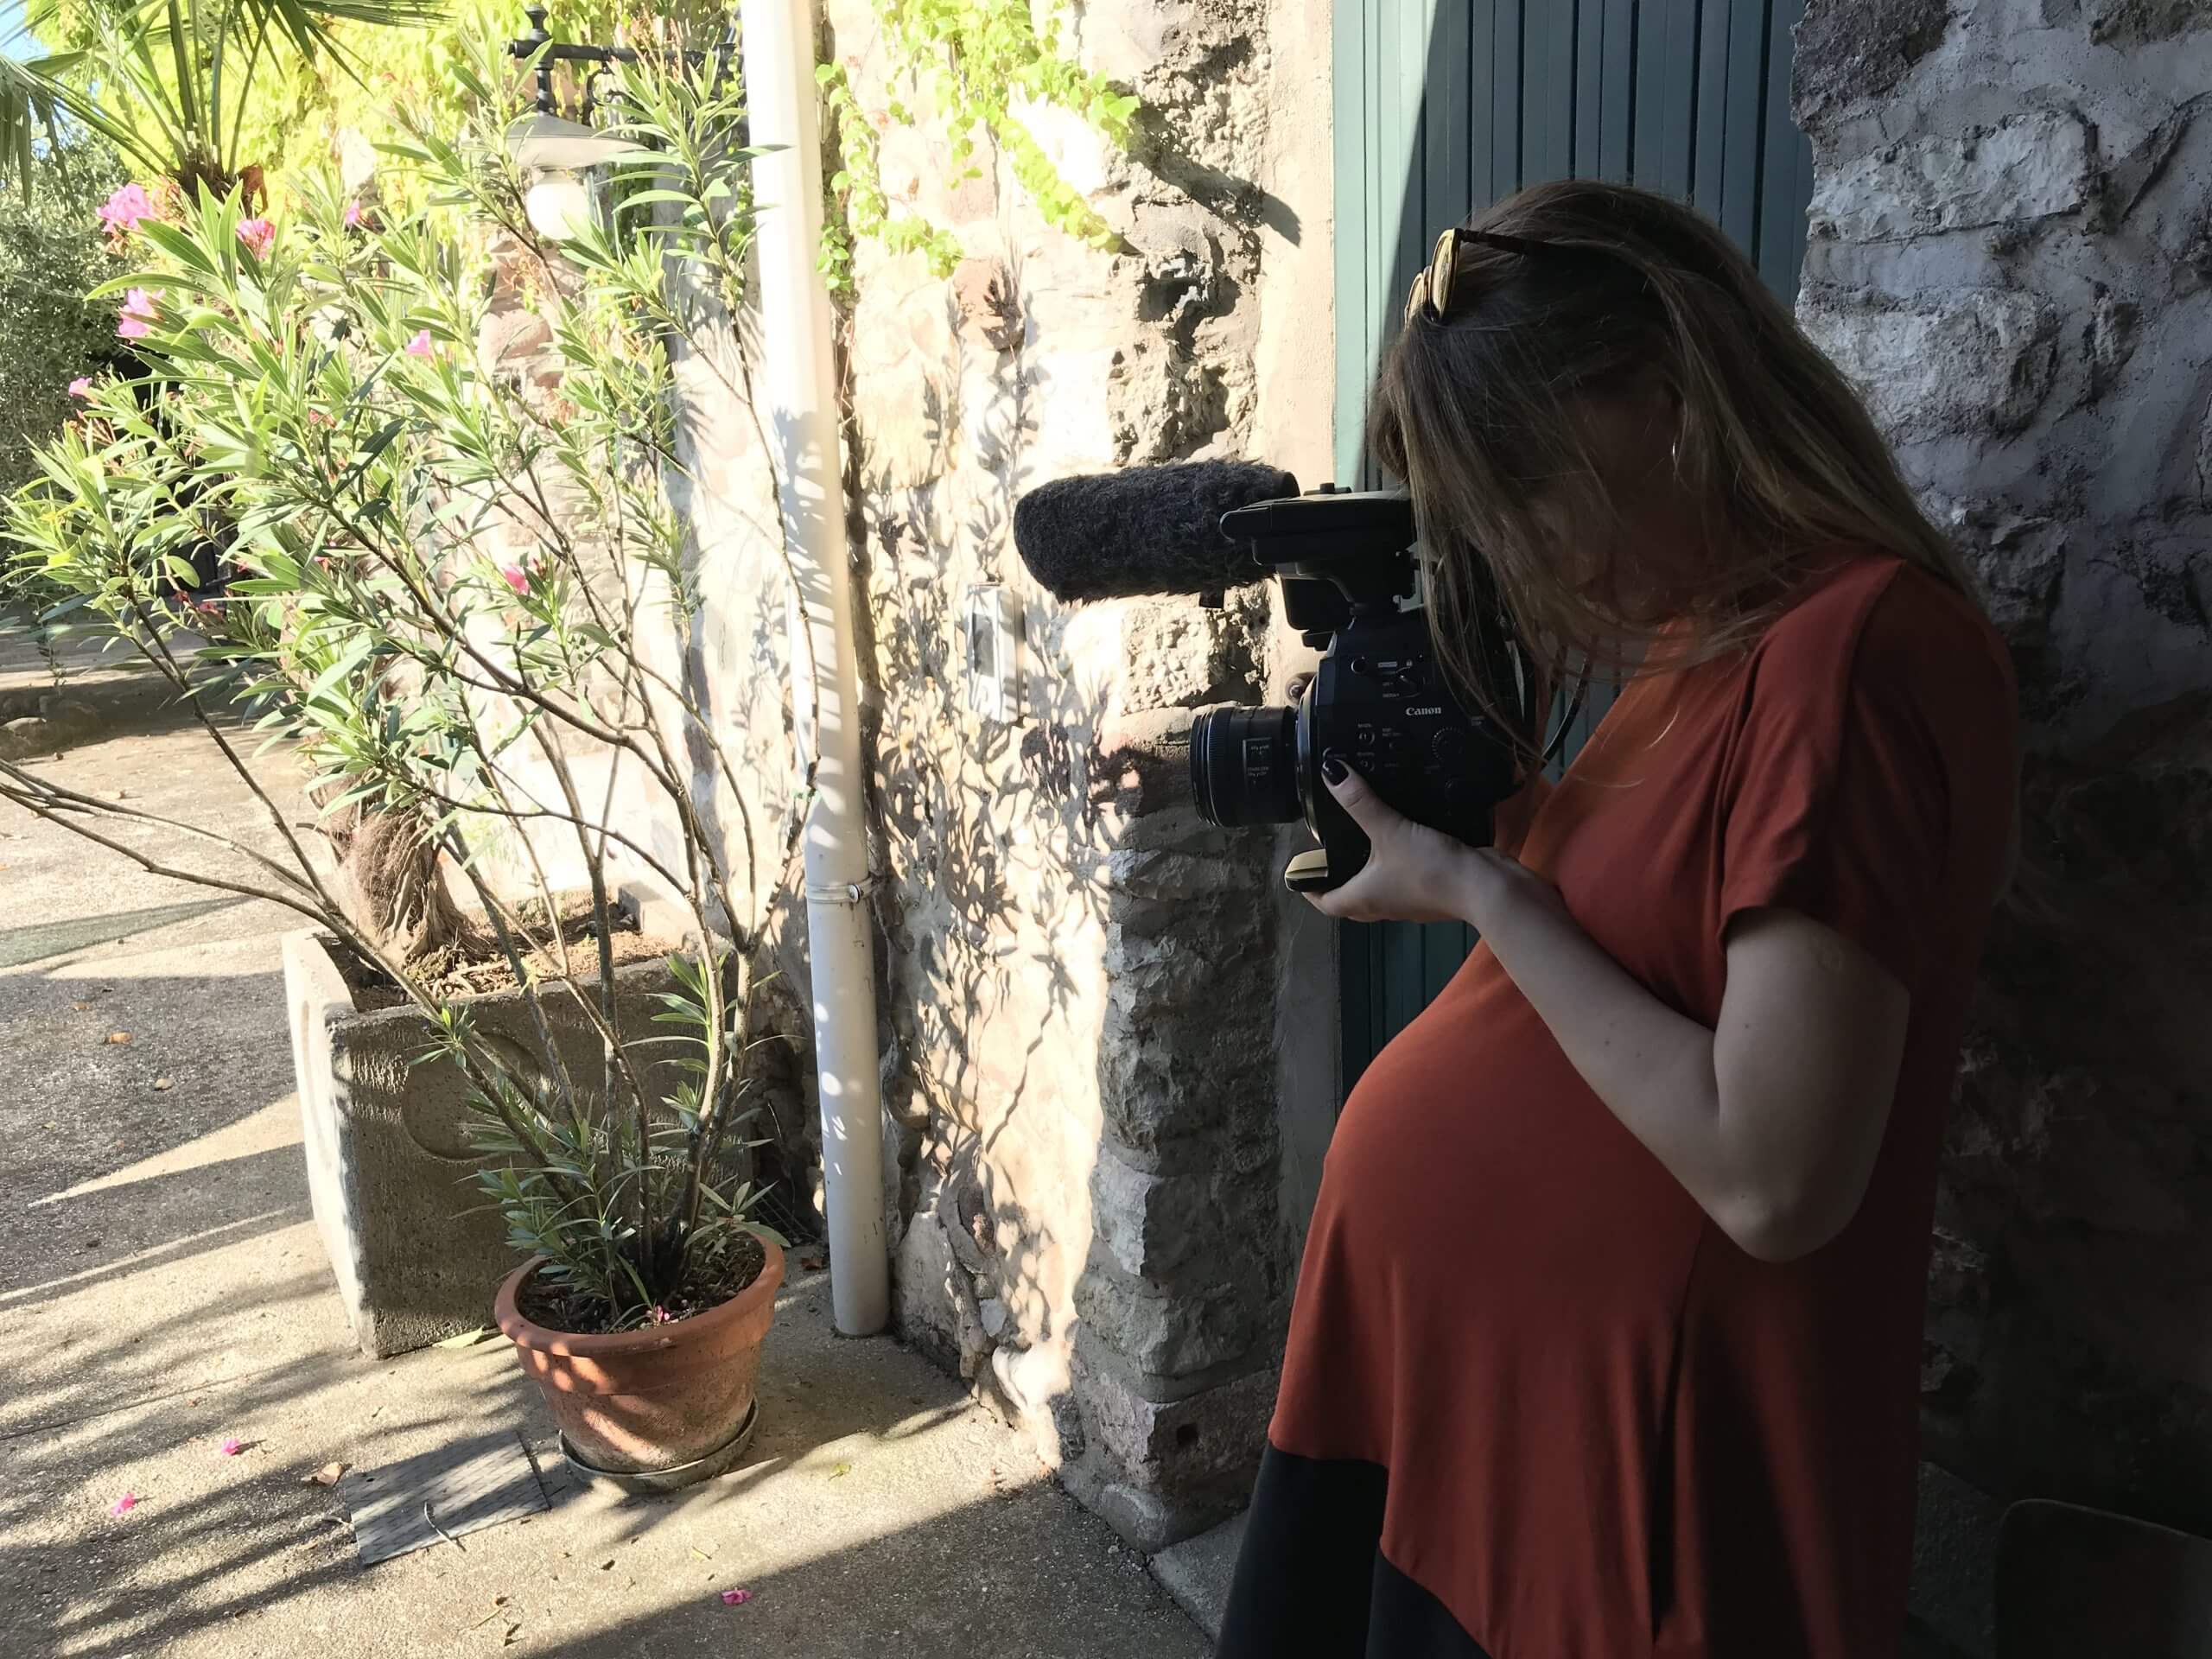 The co-director Lina Vdovii is filming her father while 7 months pregnant.